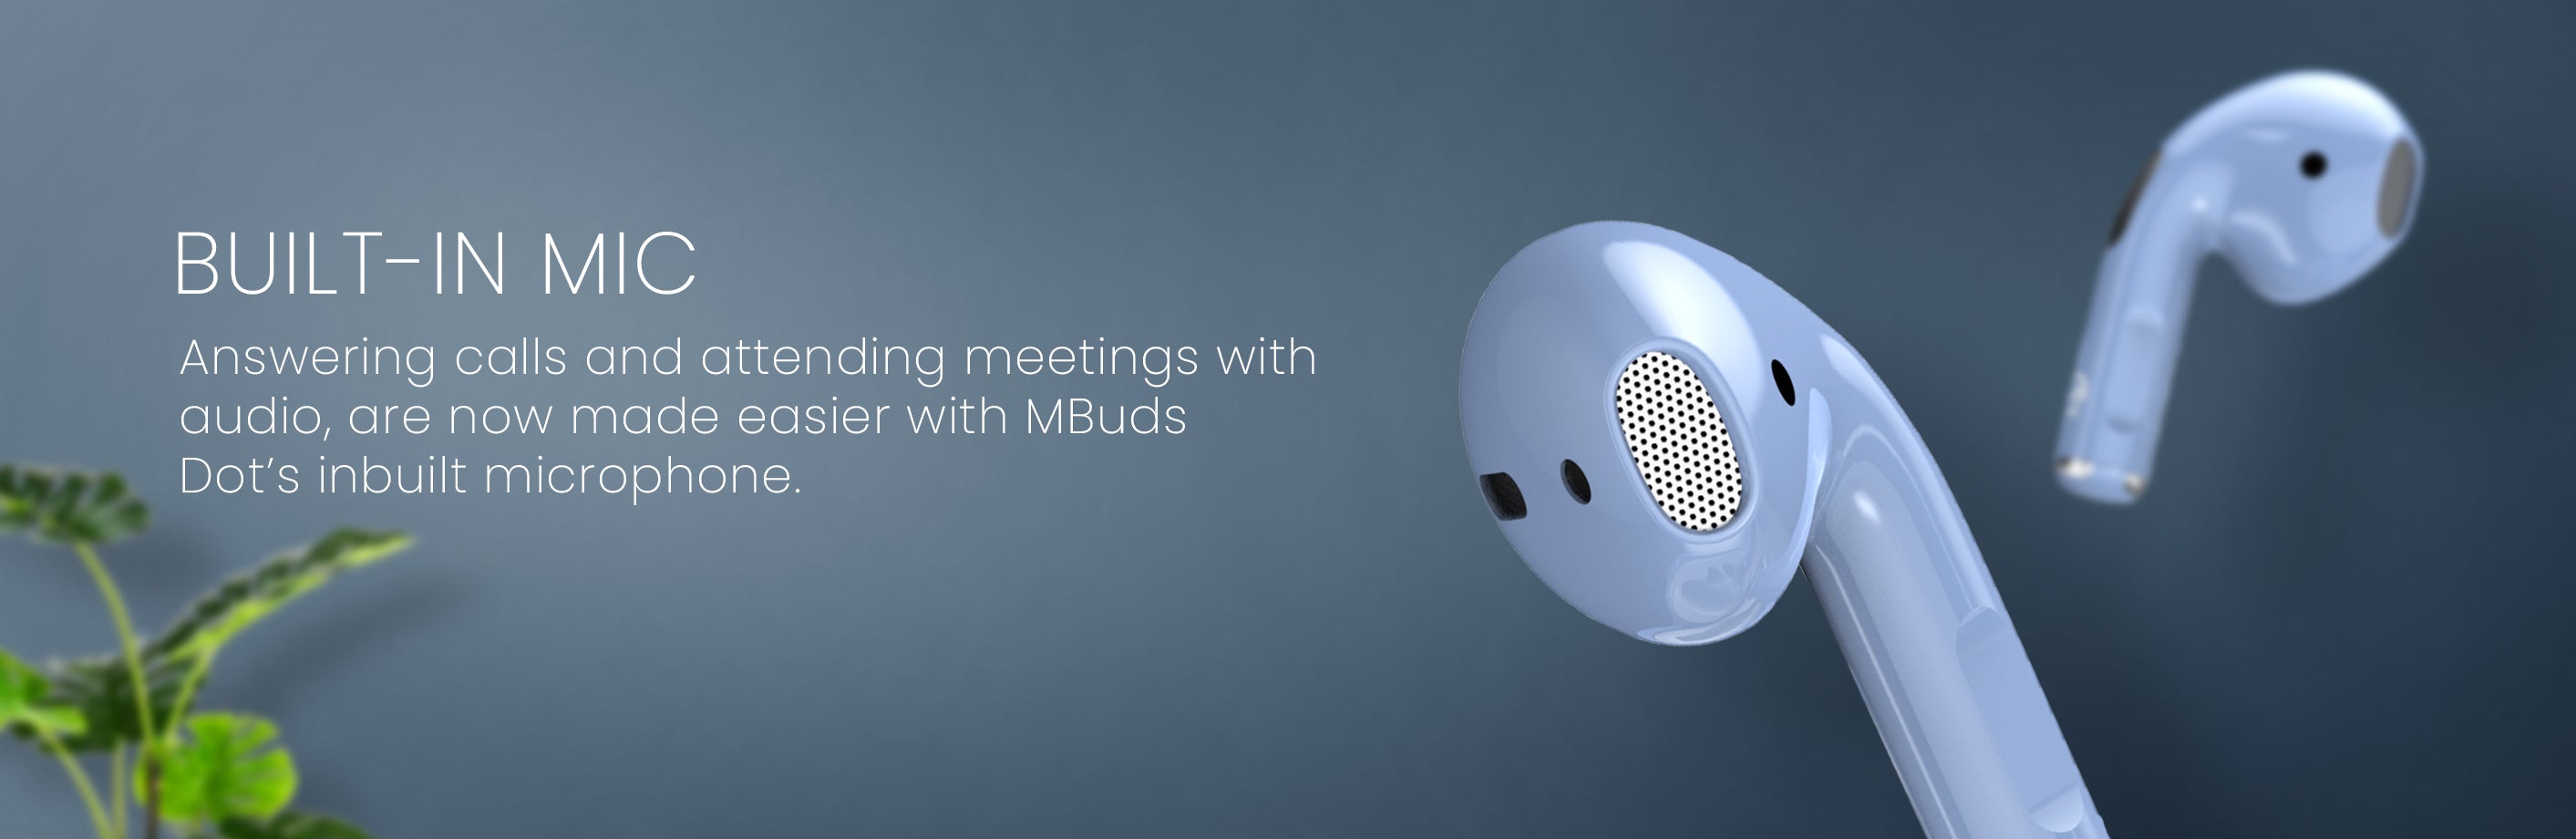 MBUDS VOICE ASSISTANT